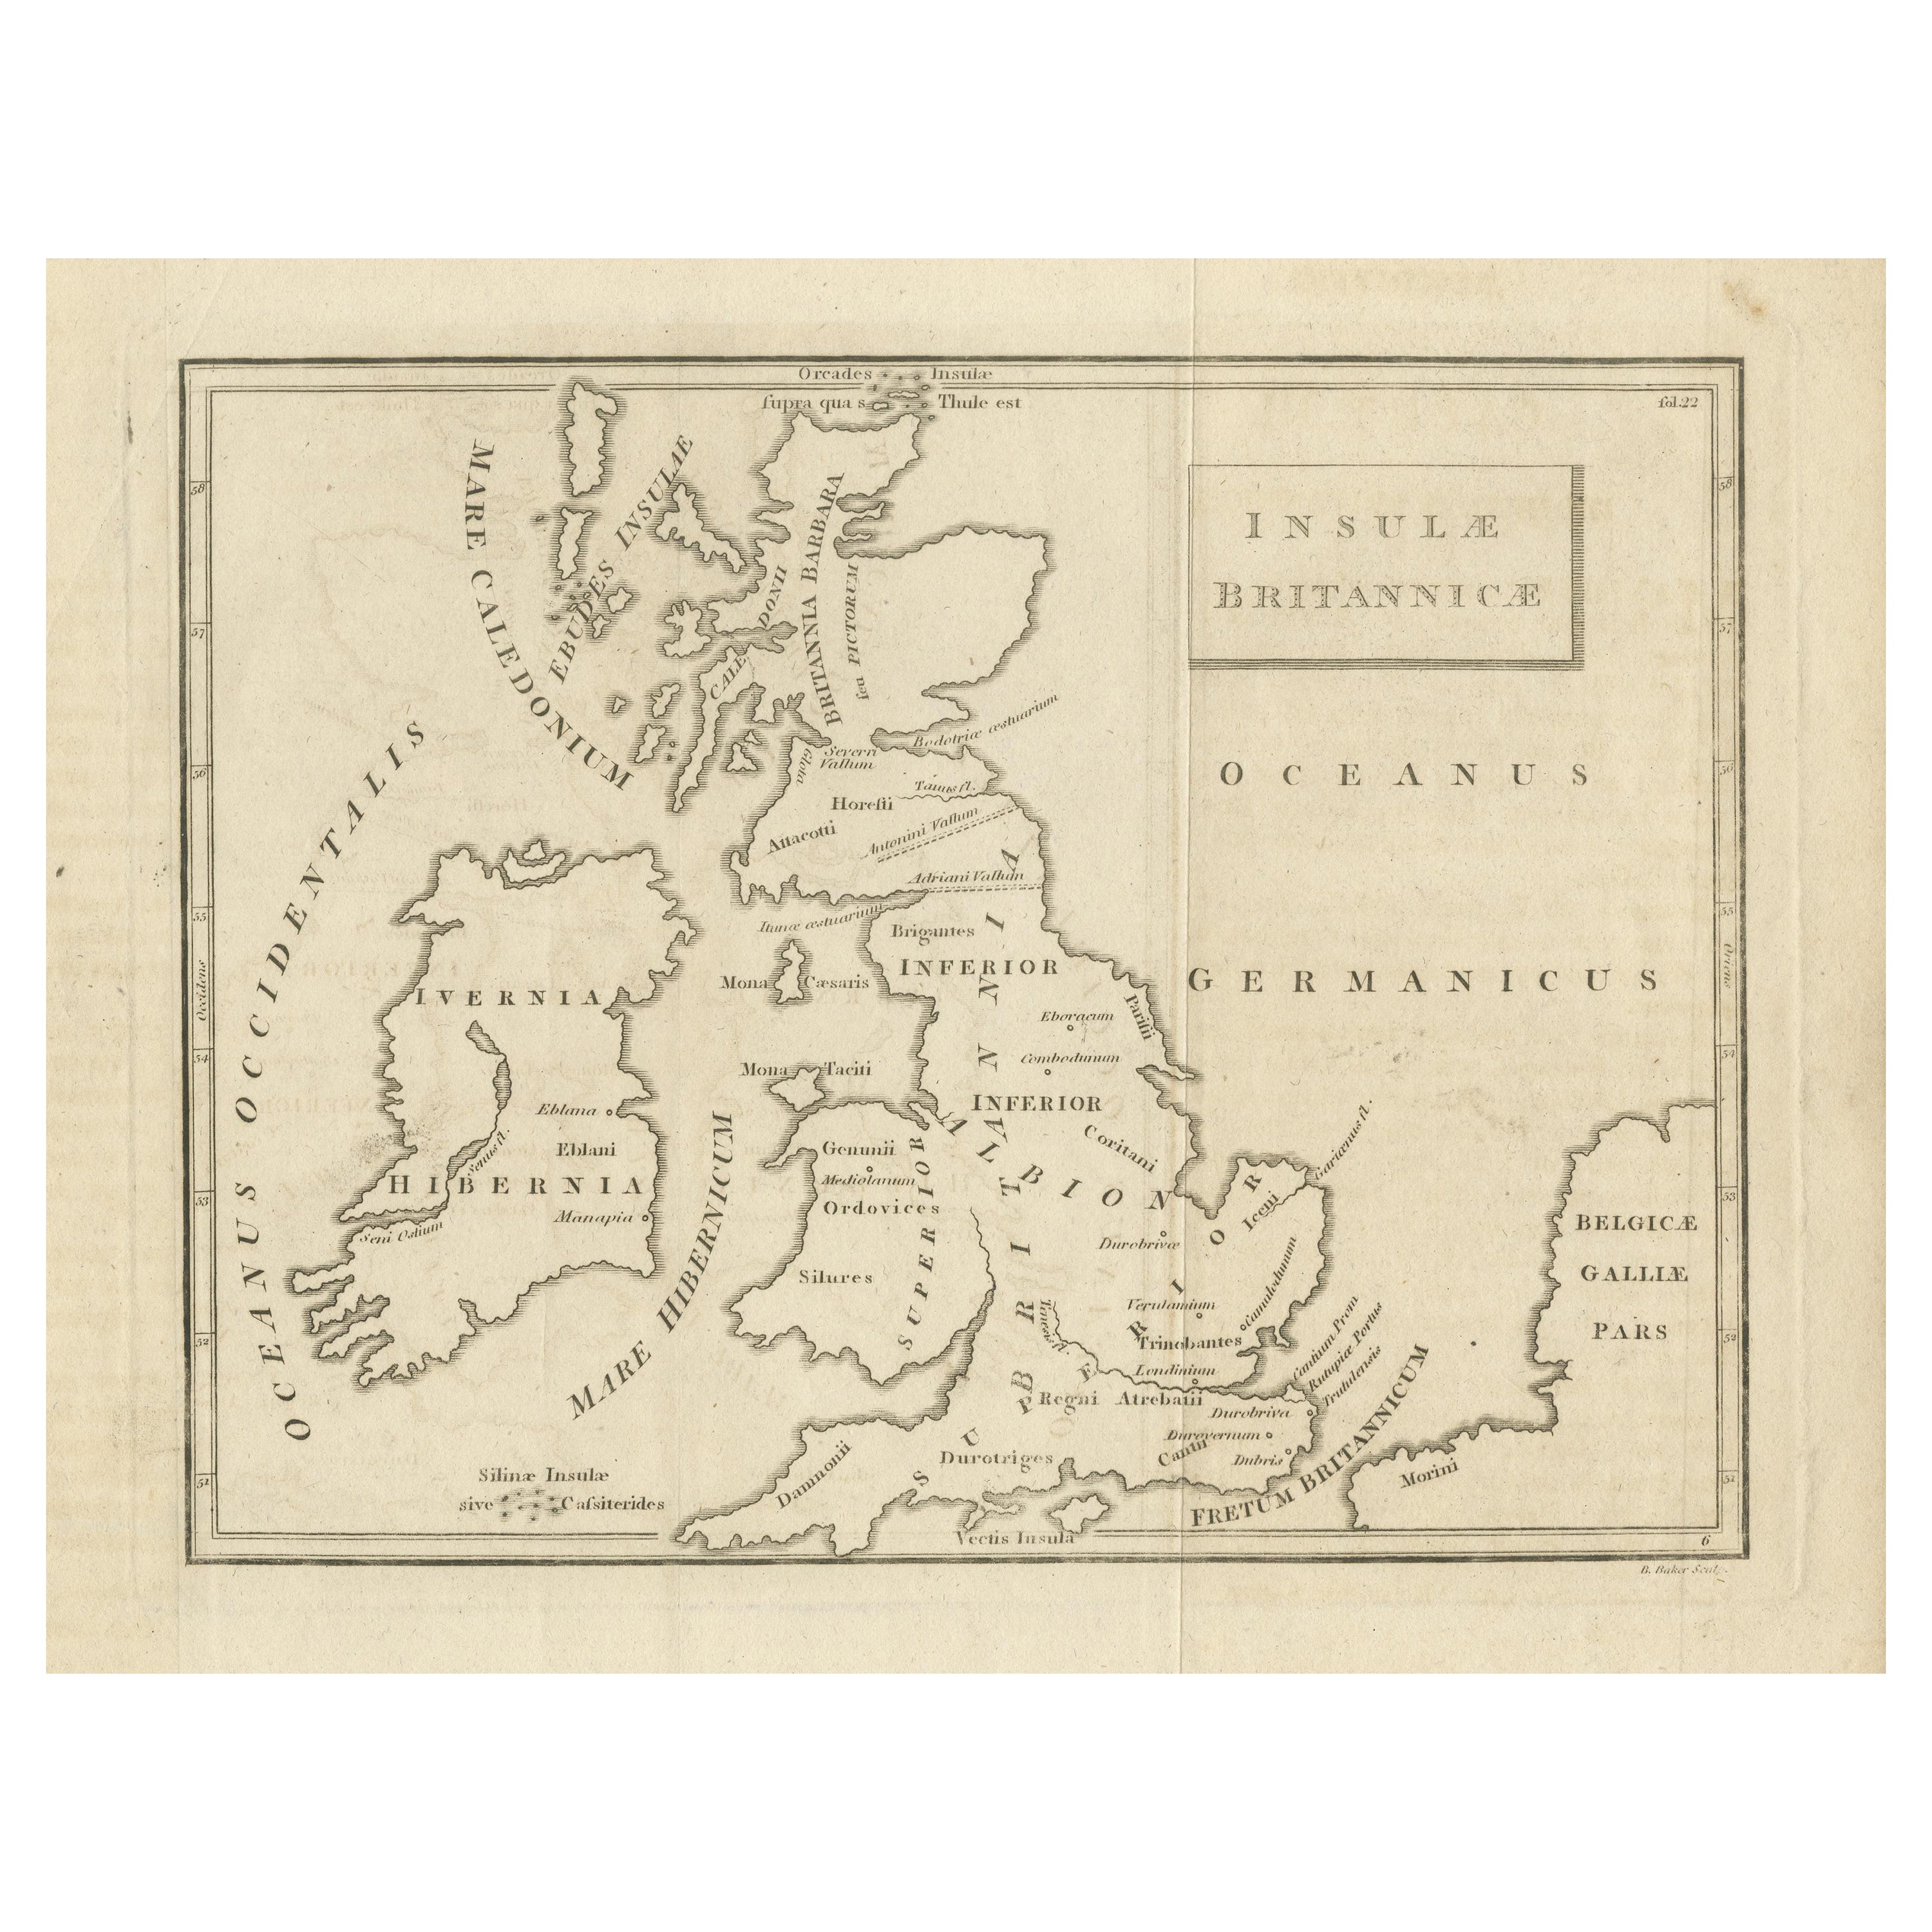 Antique Map of the British Isles According to the Geography of the Roman Empire